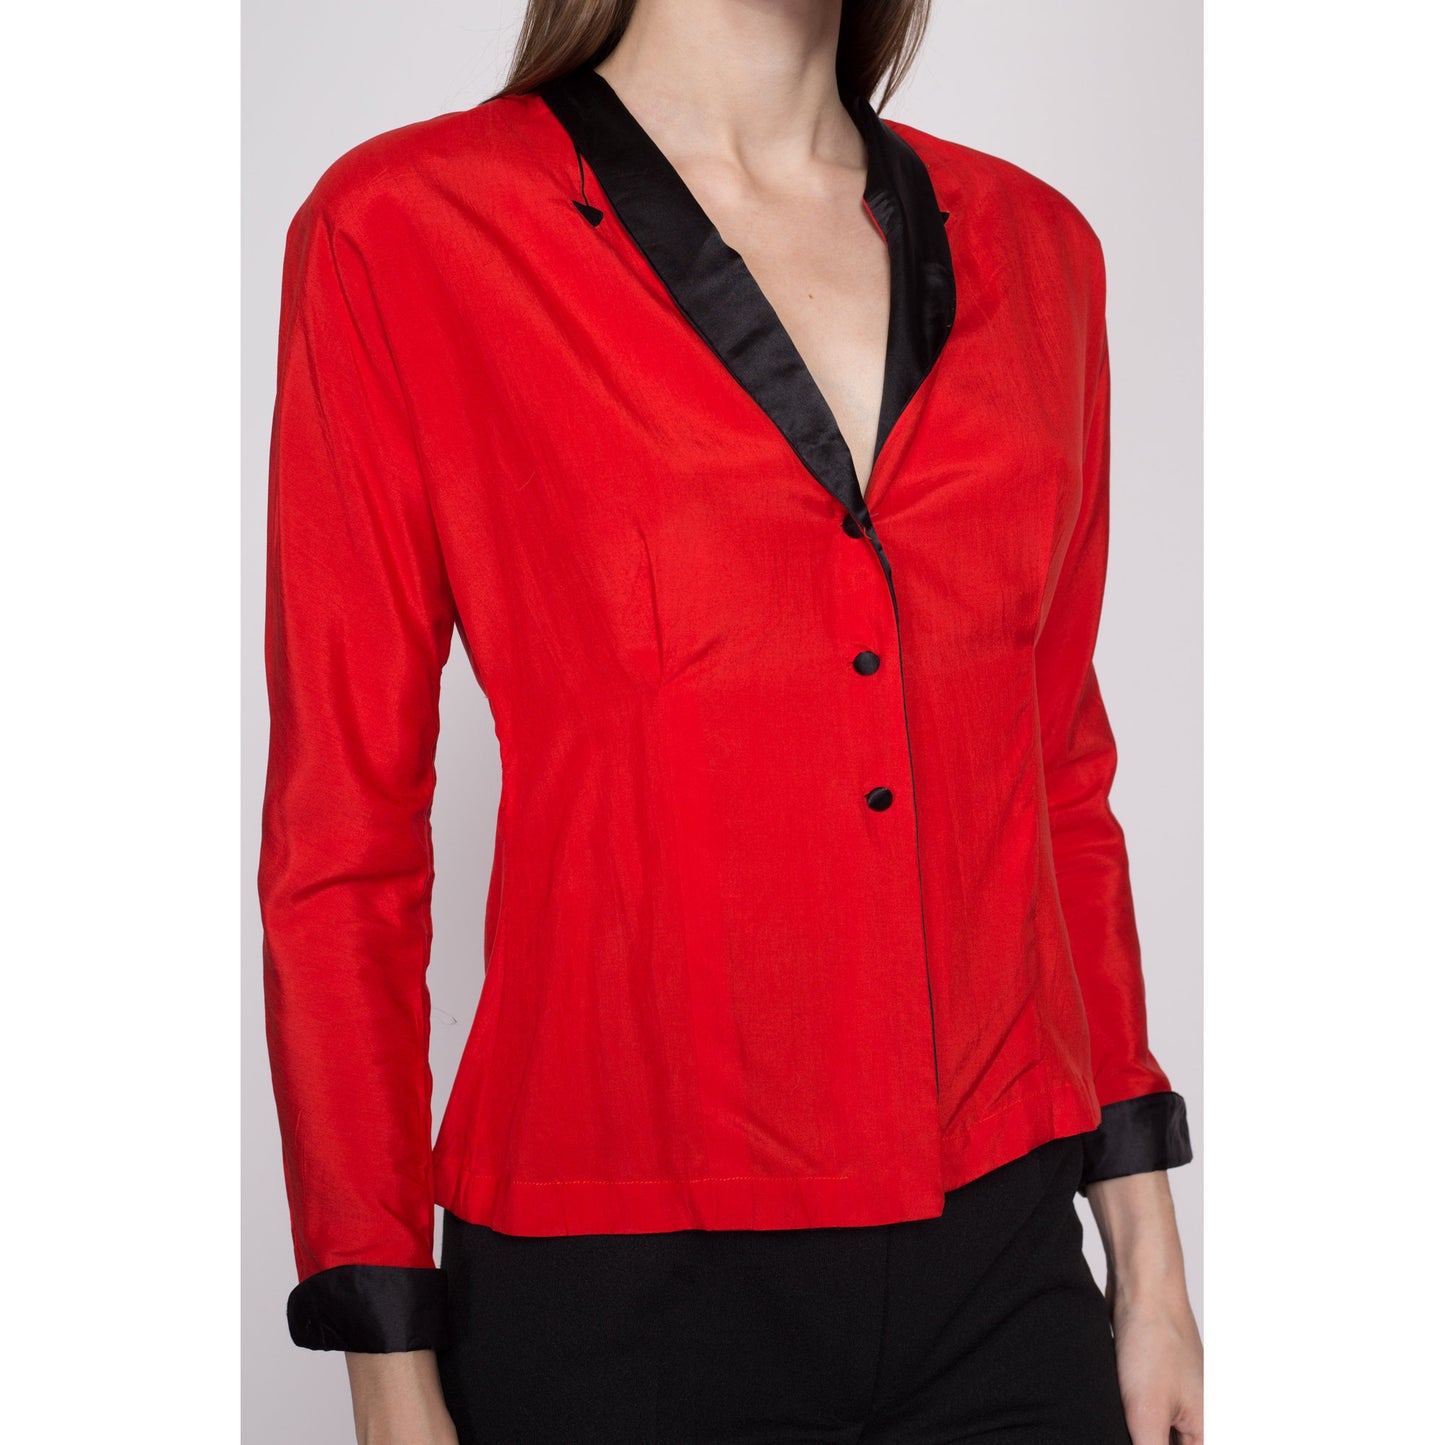 S| 80s Red Silk Western Blouse - Small | Vintage Mercedes & Adrienne Retro Collared Long Sleeve Secretary Top